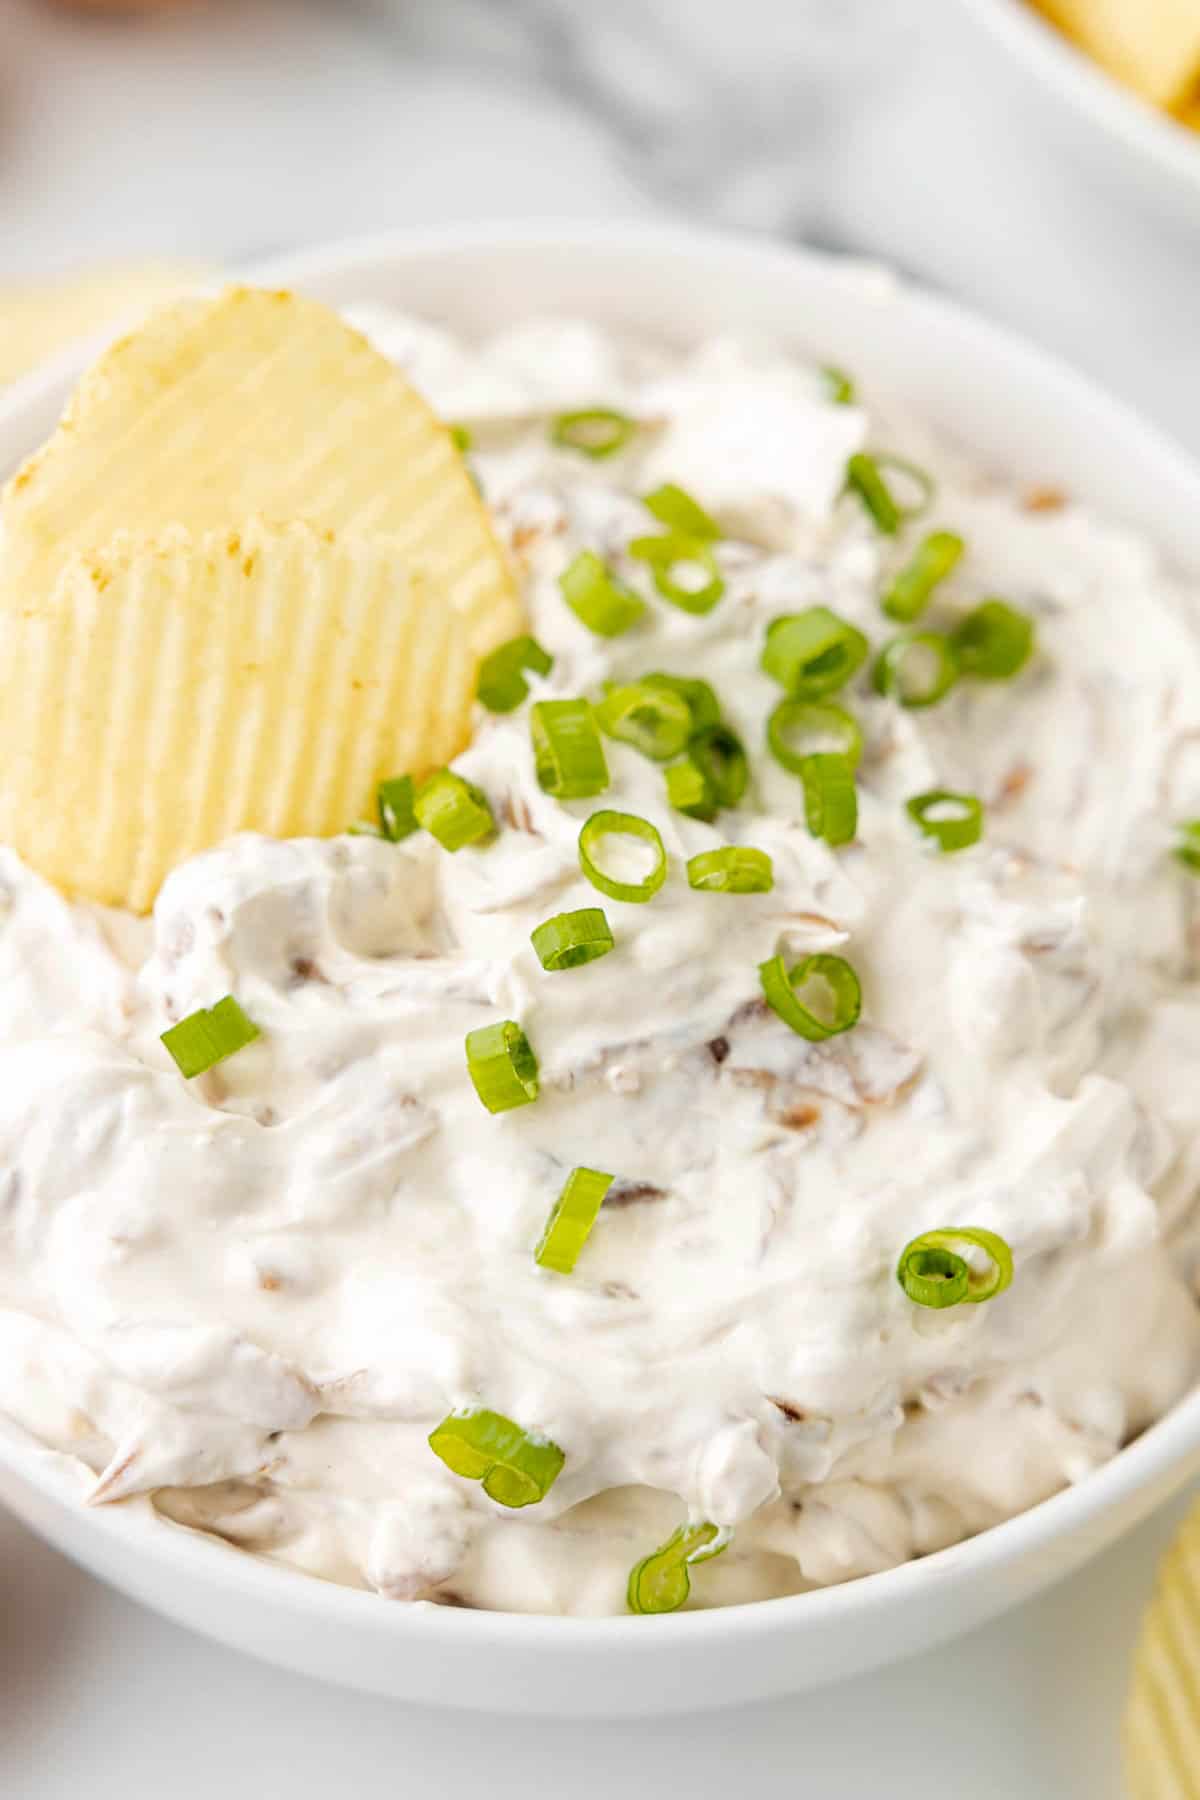 Chip in a bowl of Caramelized Onion Dip